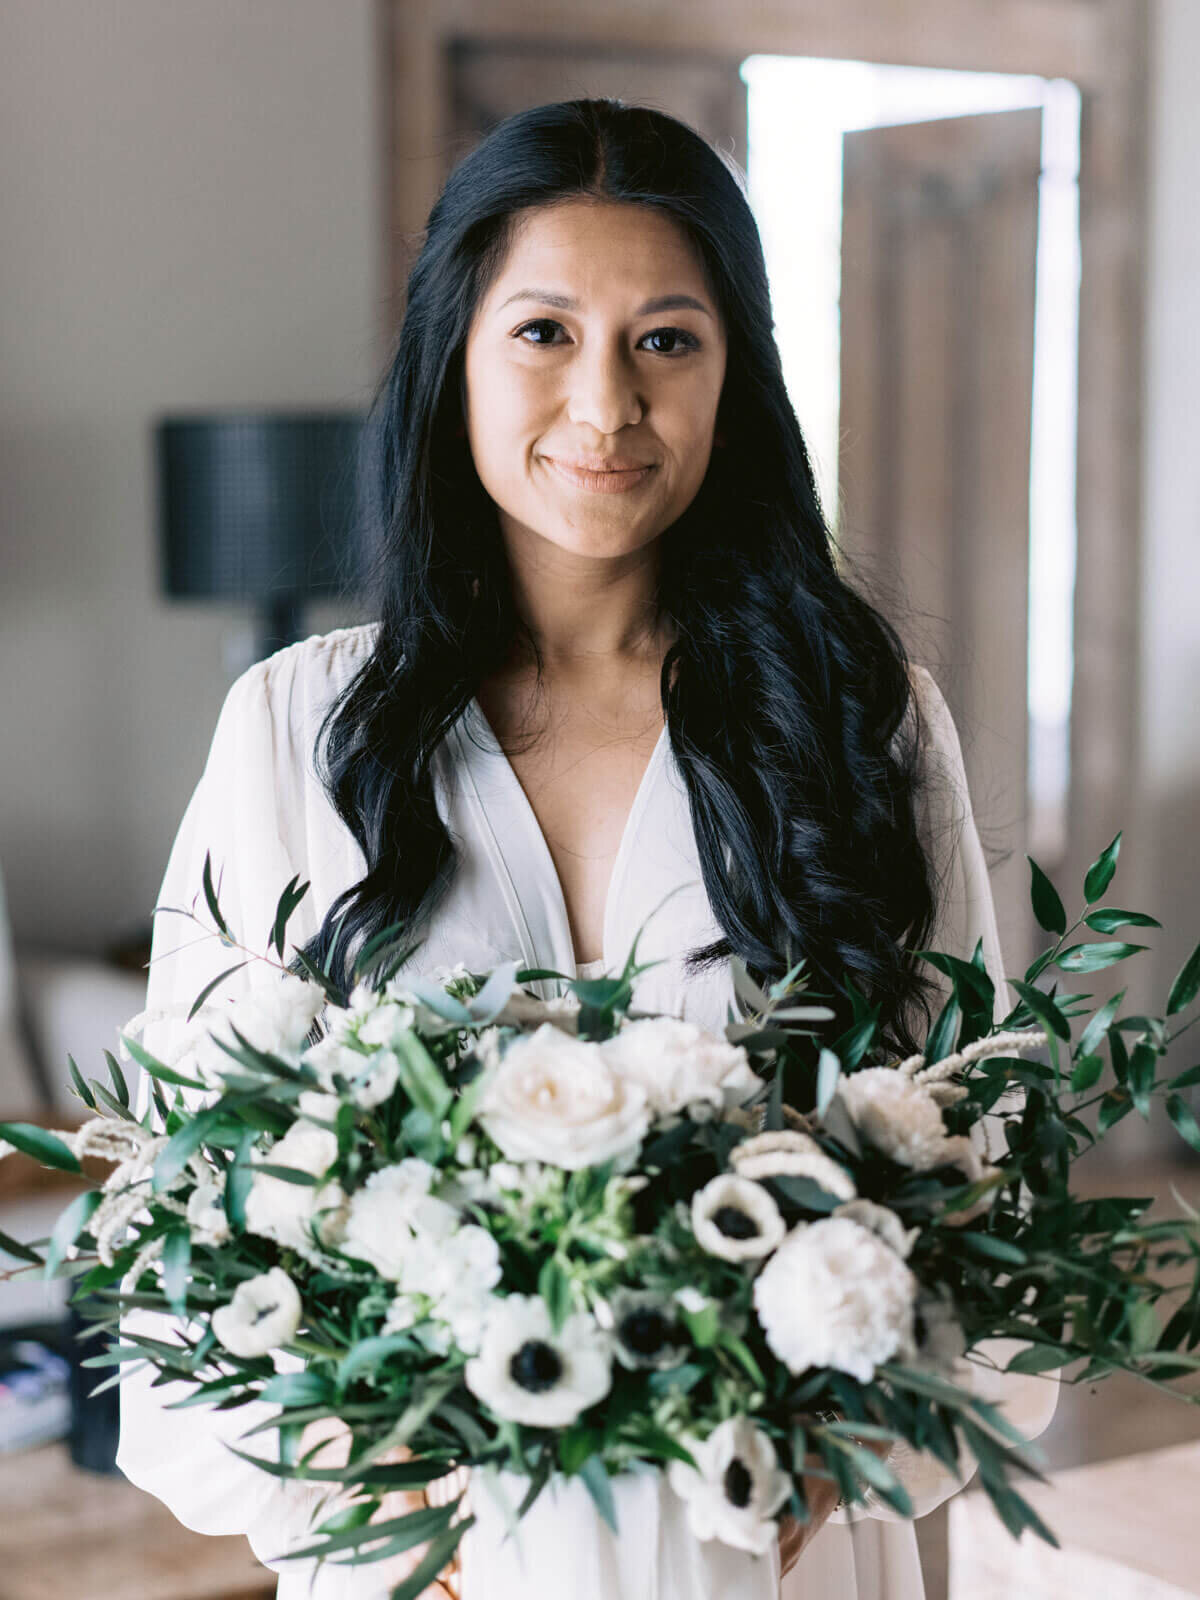 The bride is holding her flower bouquet inside the room before the wedding in Khayangan Estate, Indonesia. Image by Jenny Fu Studio